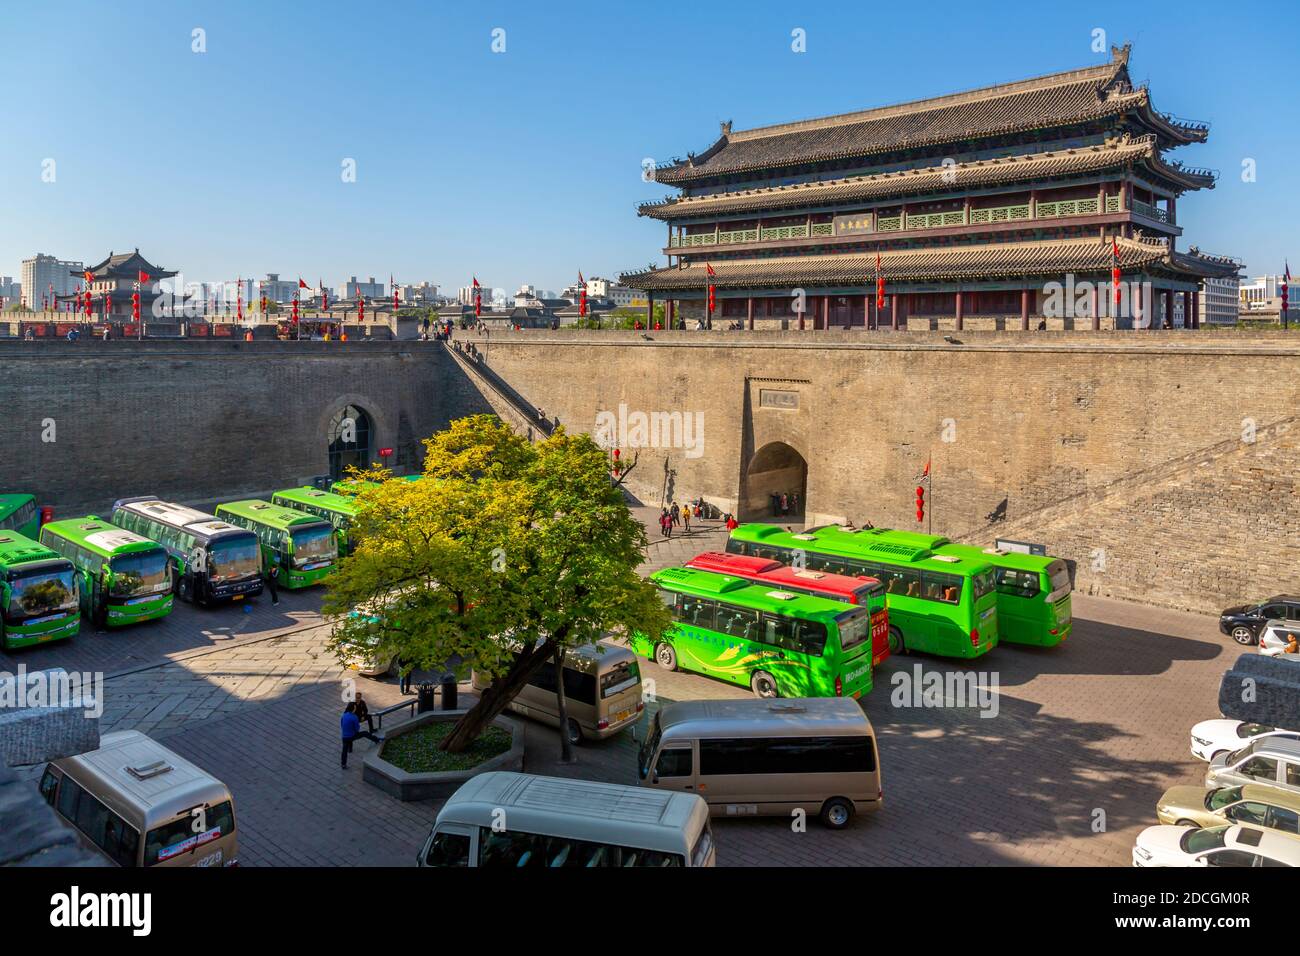 View of the City wall of Xi'an, Shaanxi Province, People's Republic of China, Asia Stock Photo